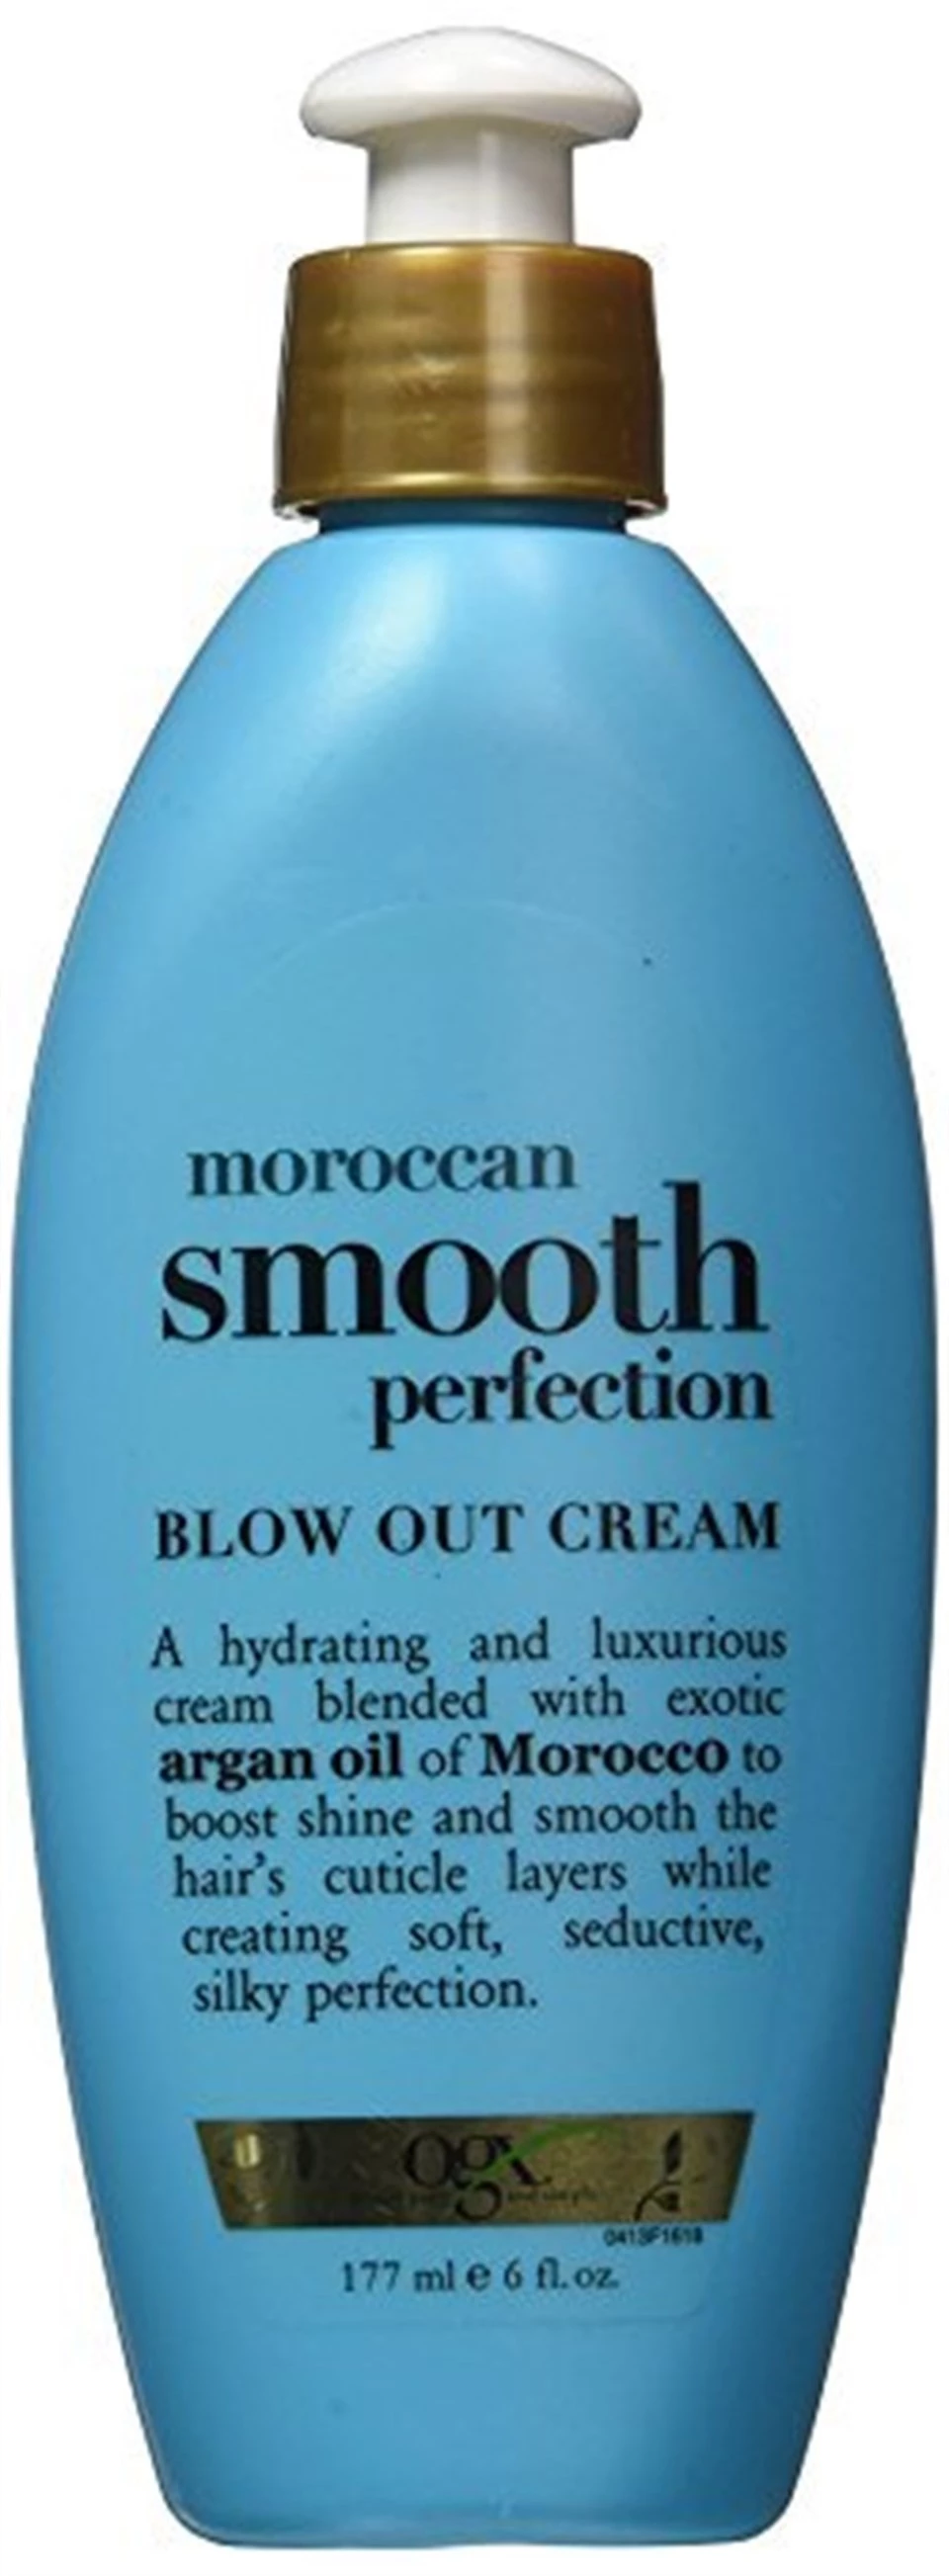 Organix Moroccan Smooth Perfection Blow Out Cream 177 ml